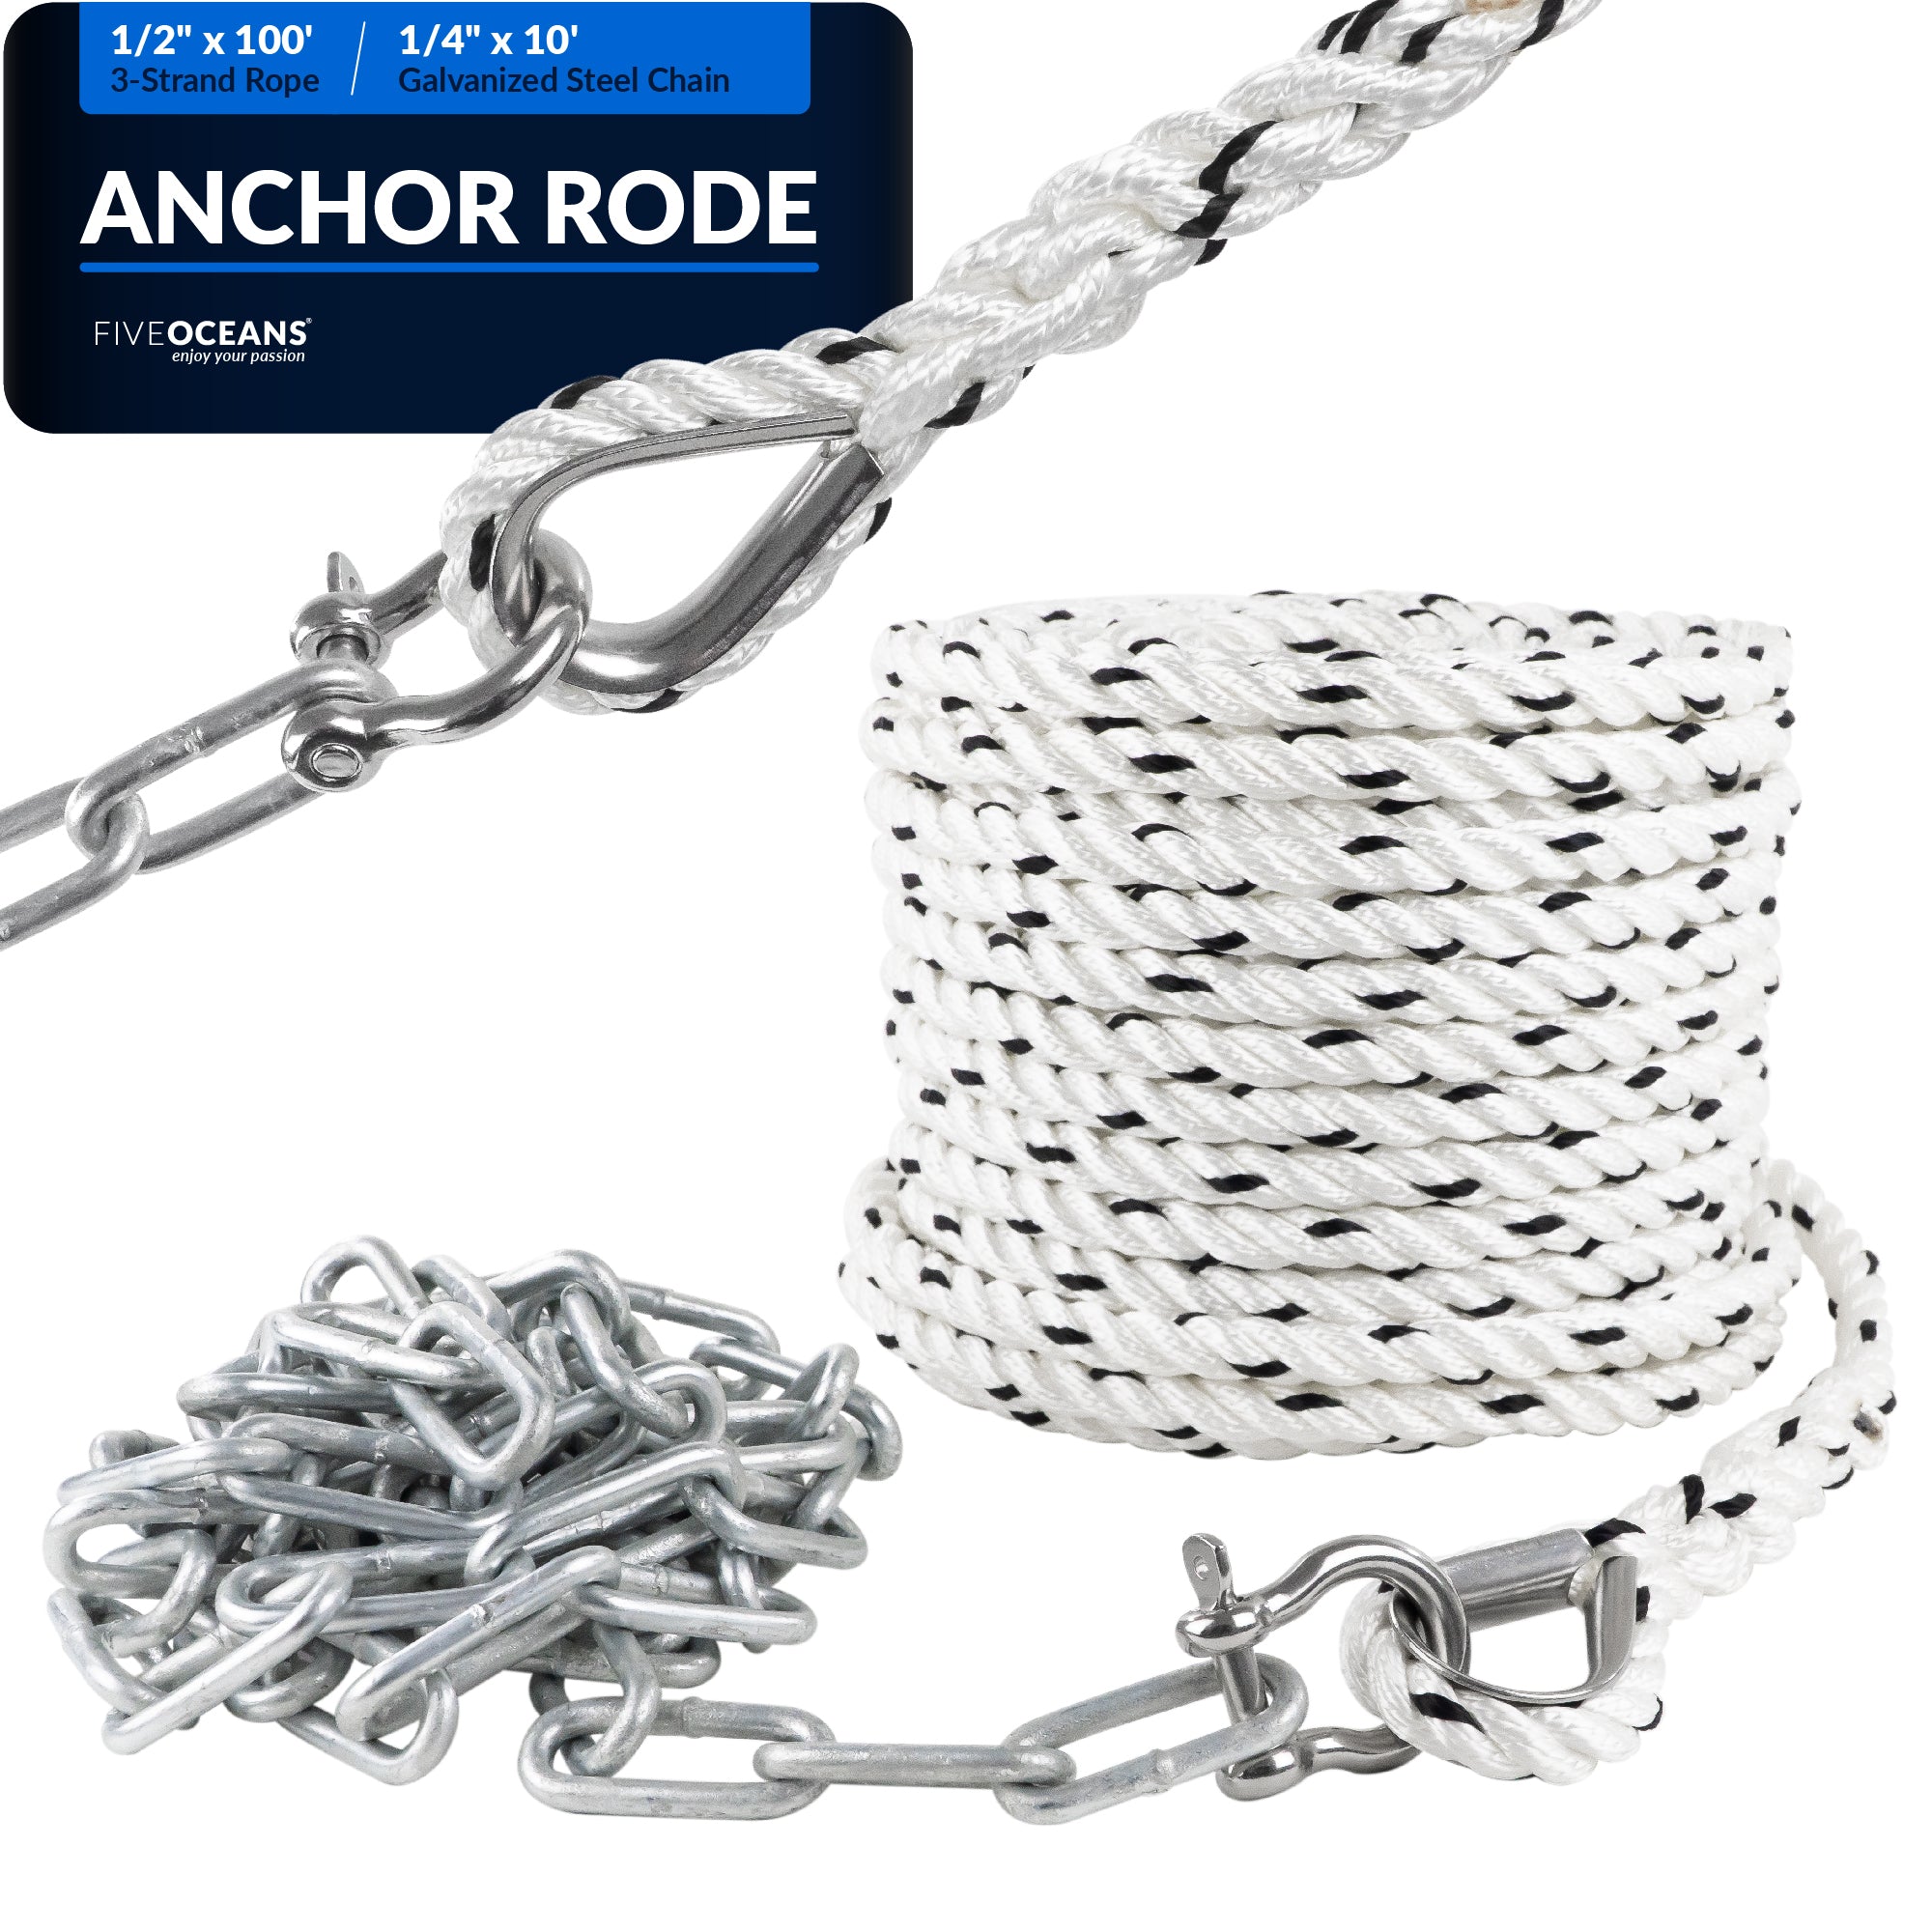 Anchor Rode, 1/2" x 100' Nylon 3-Strand Rope, 1/4" x 10' Hot Dipped Galvanized Steel Chain - FO4572